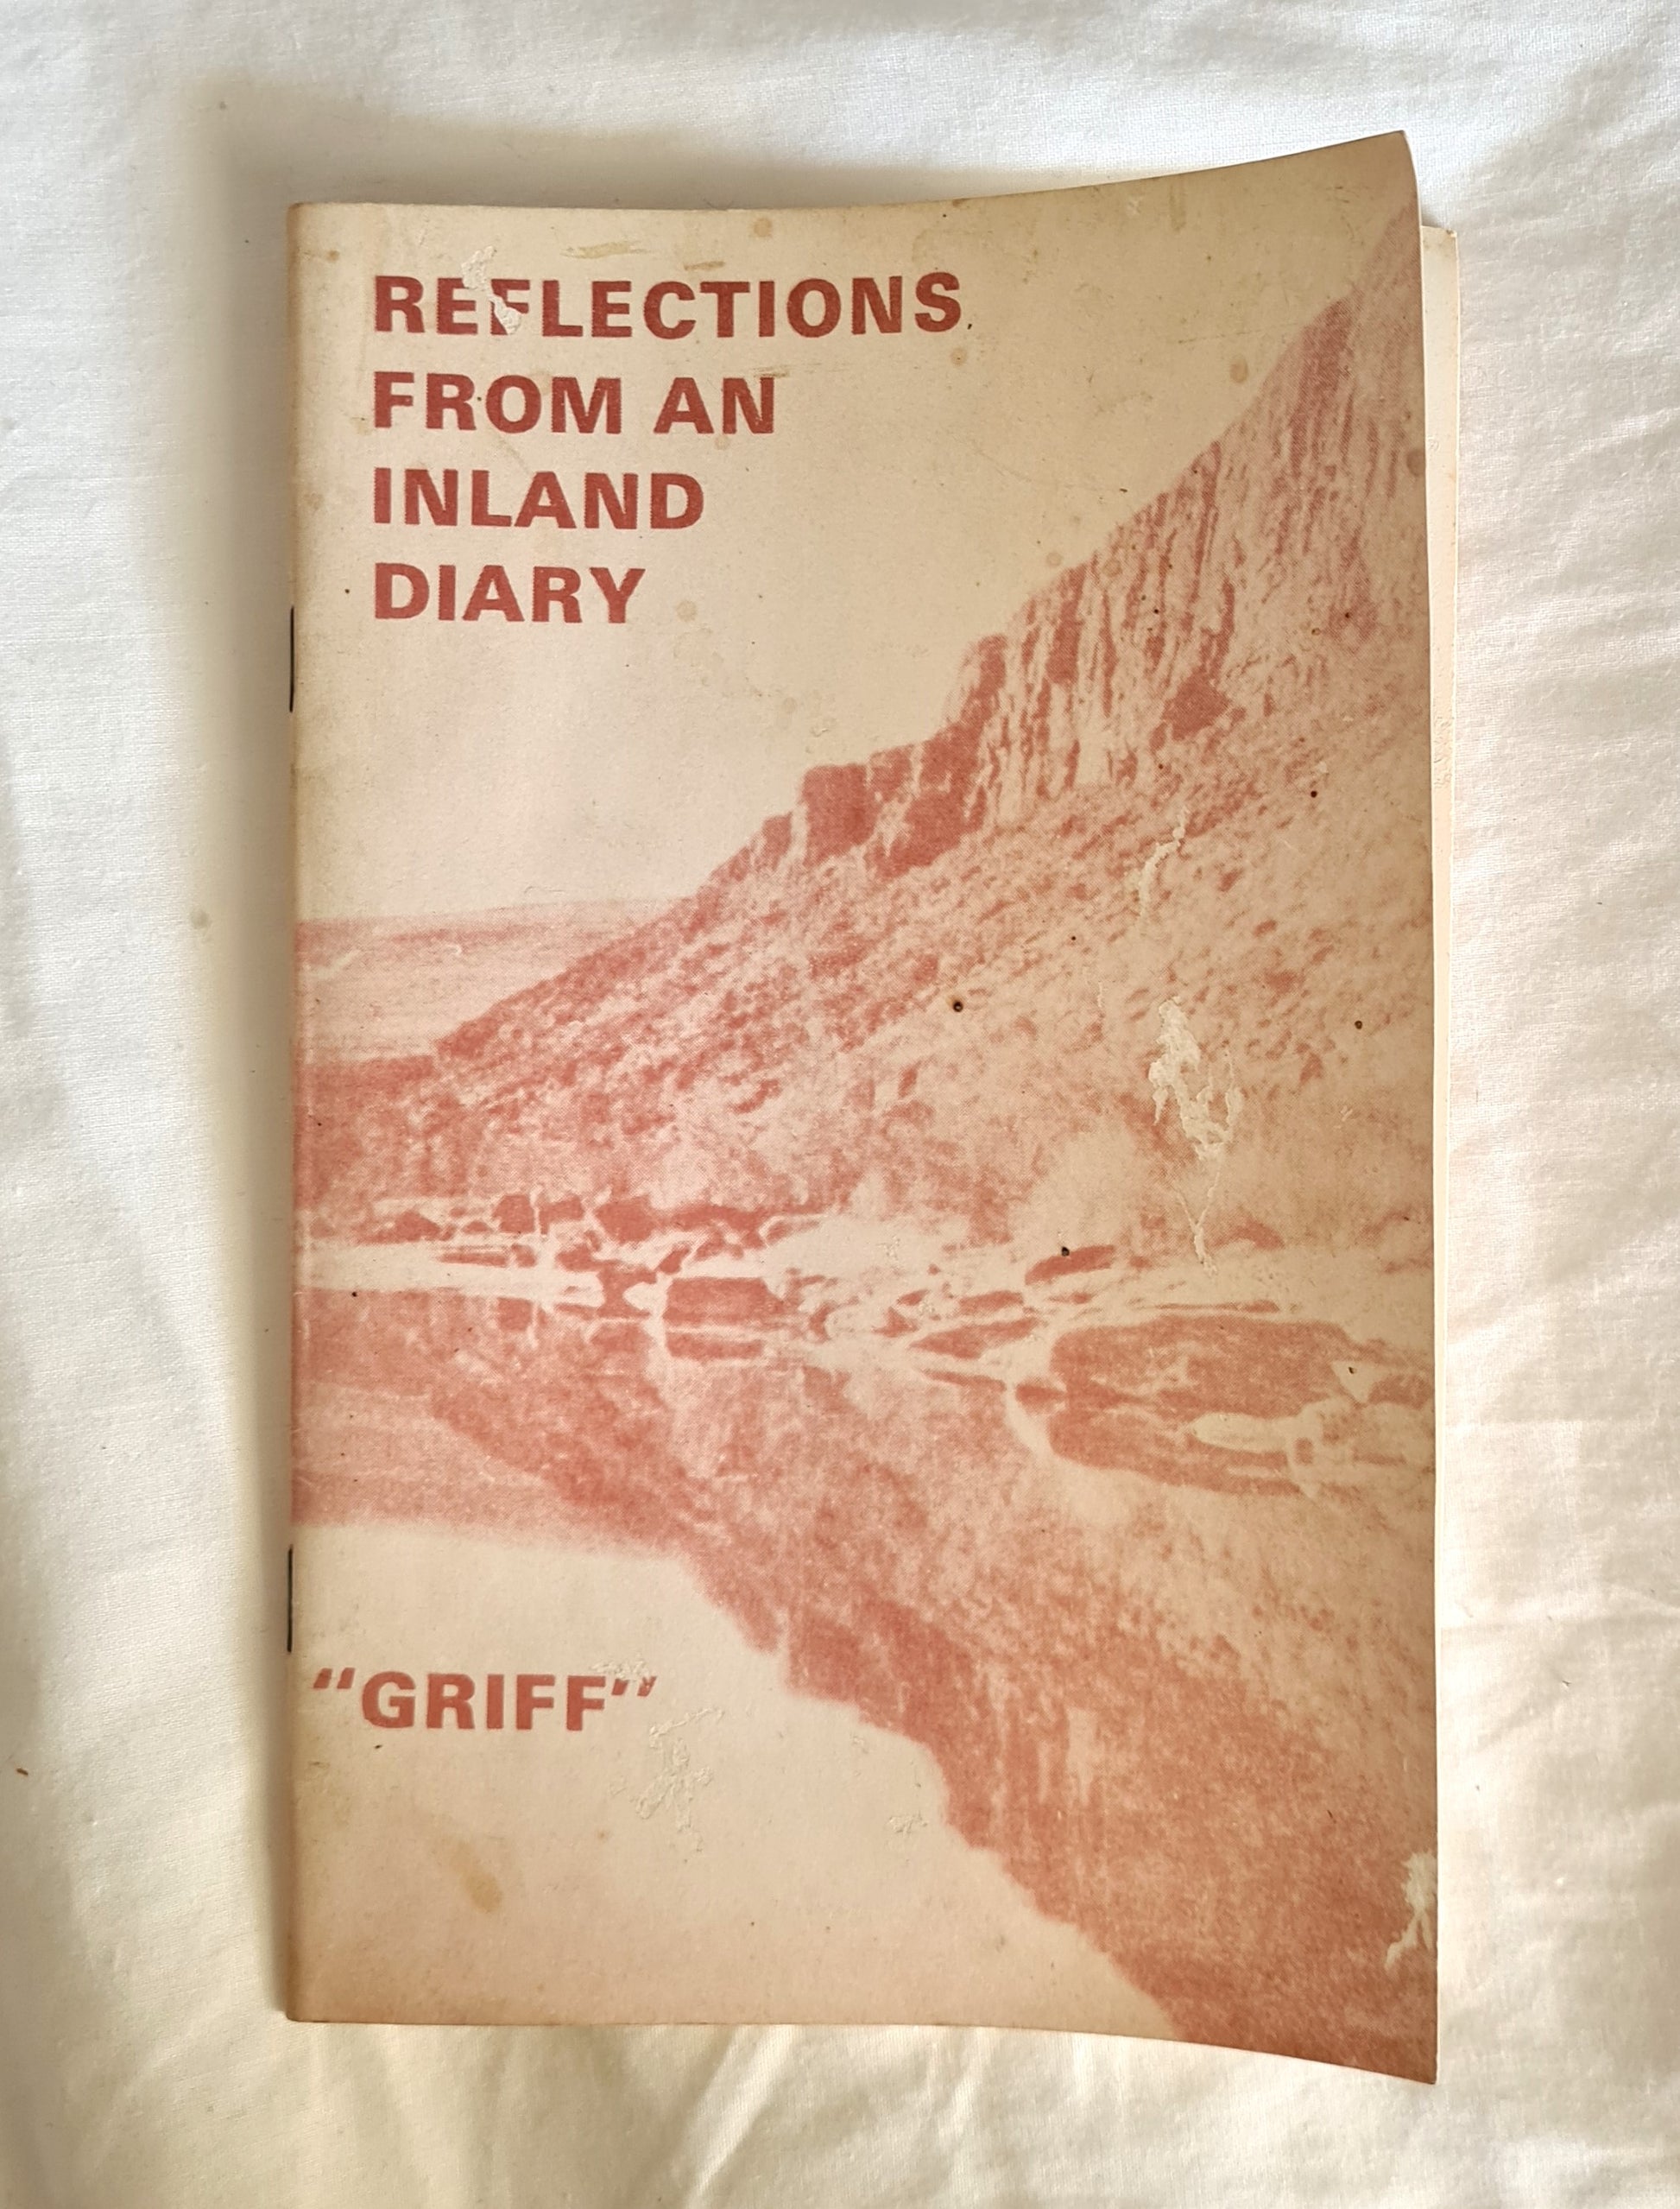 Reflections From An Inland Diary  by Rev. Harry Griffiths “Griff”